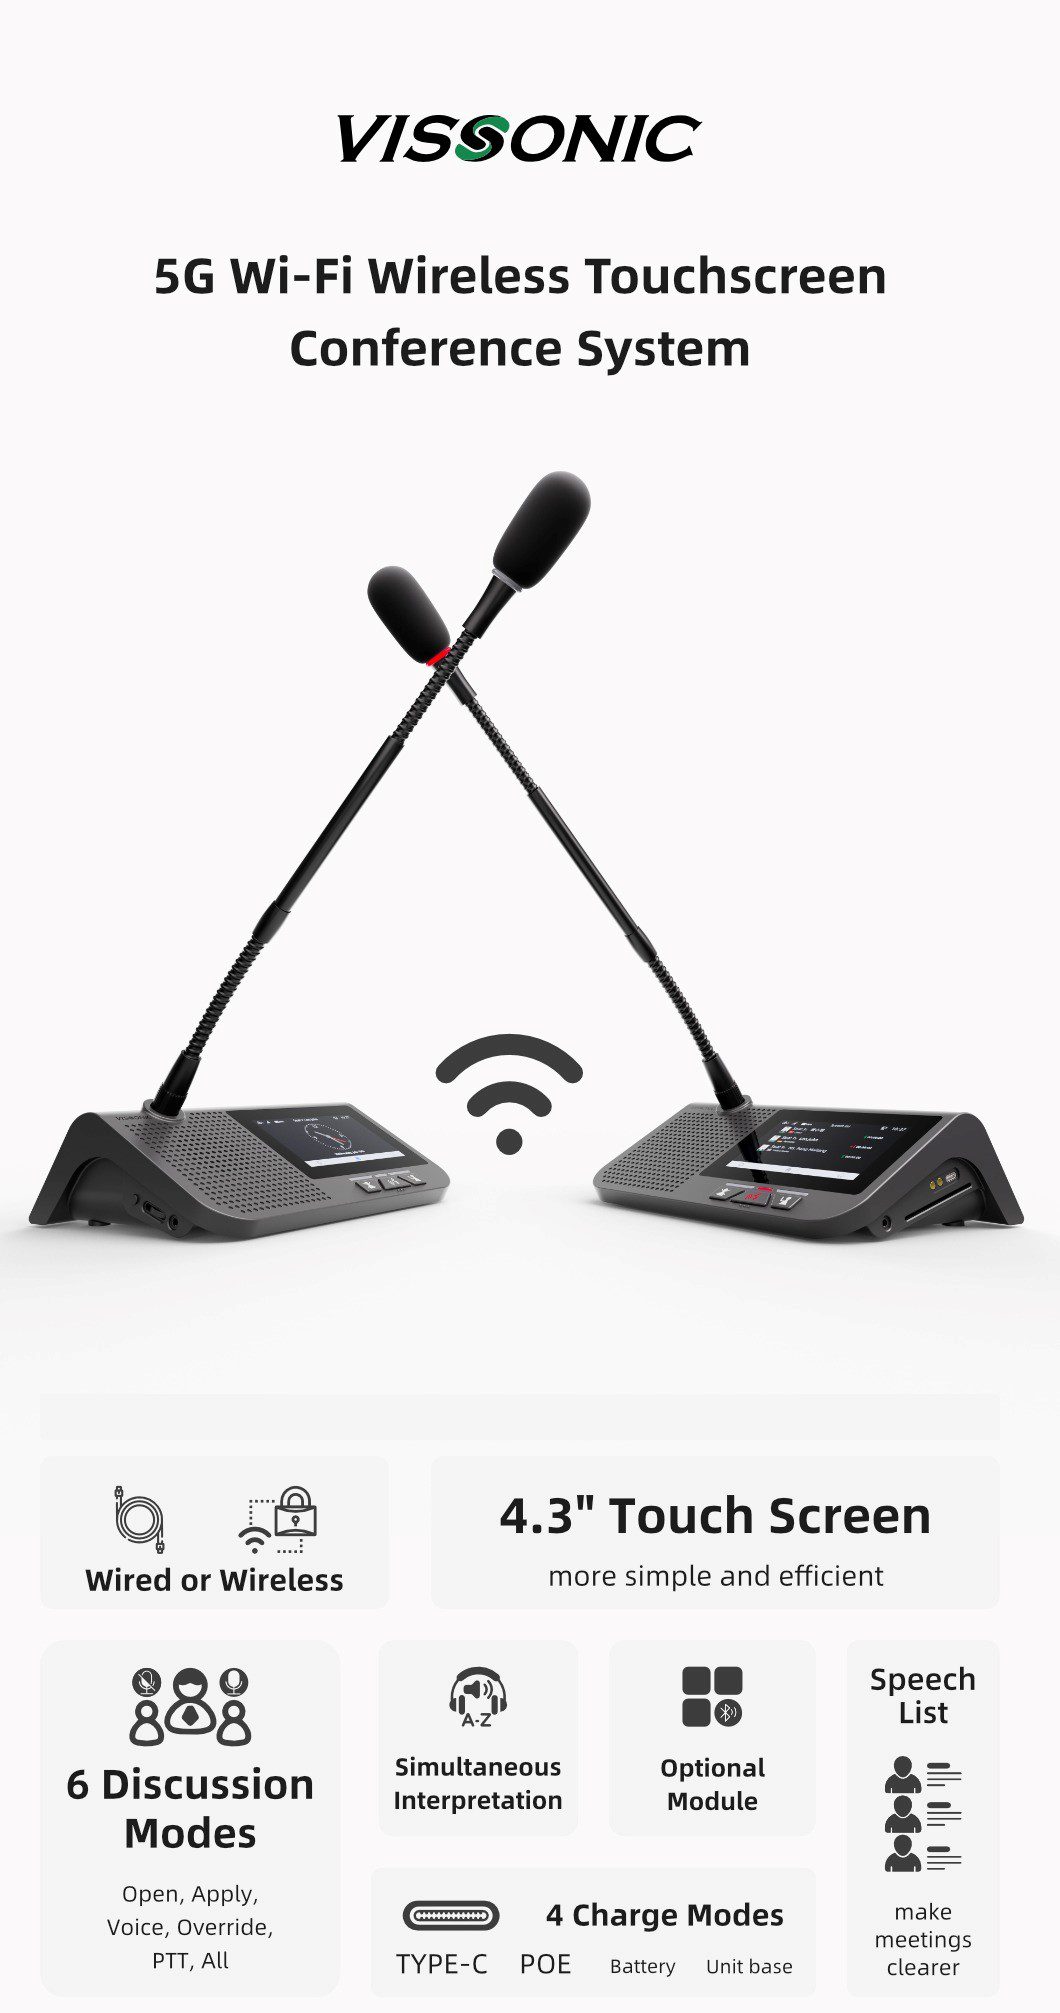 WIFI Wireless Conference System